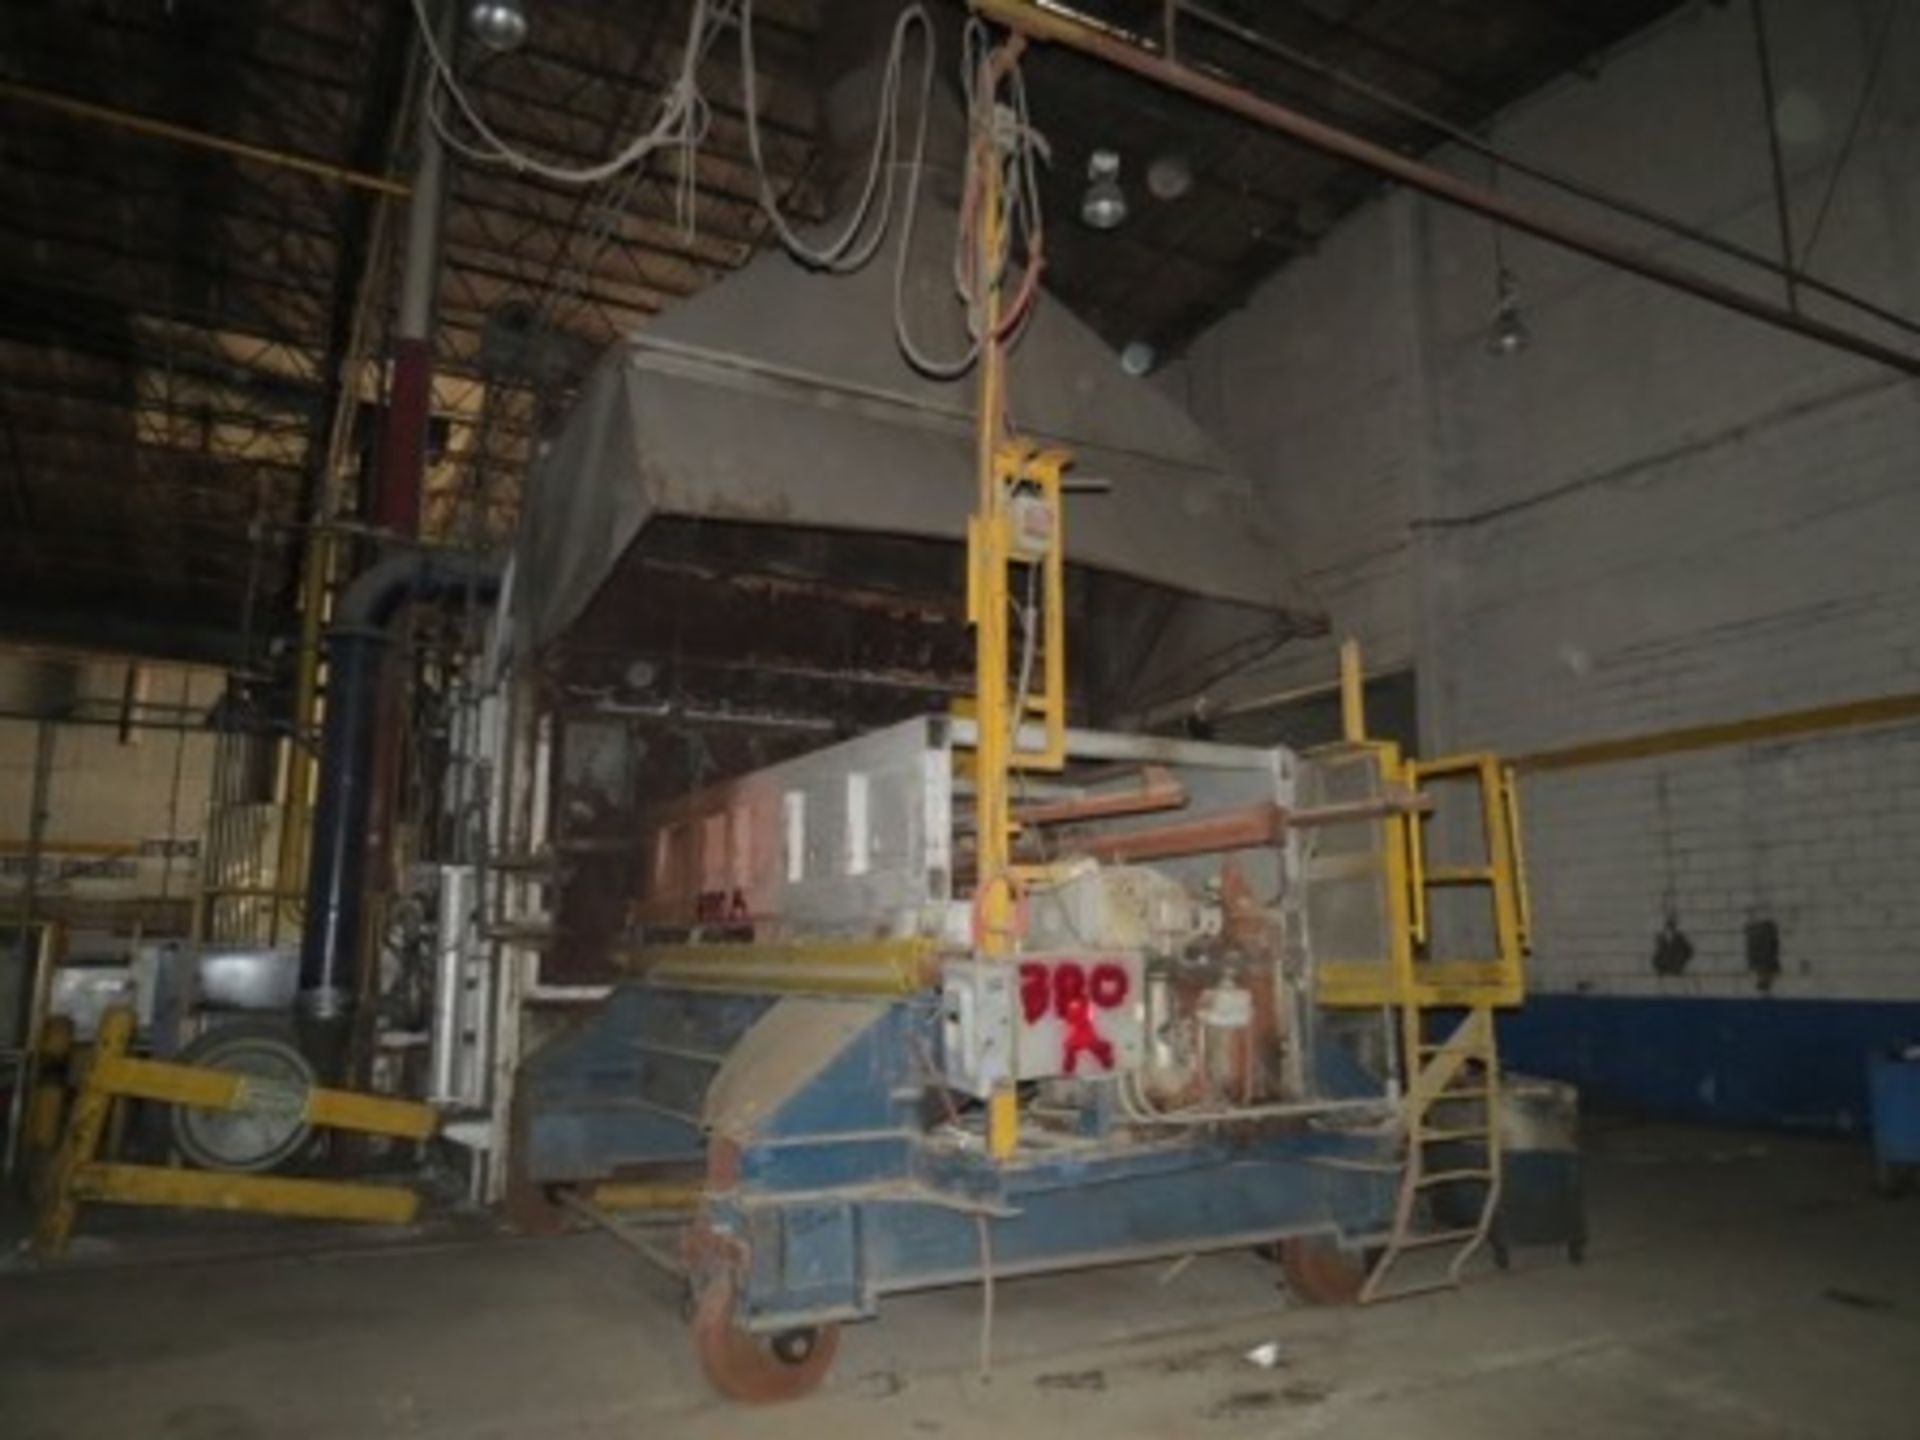 Melting furnace with dumper, hood and ductwork for gas extraction. - Image 10 of 28